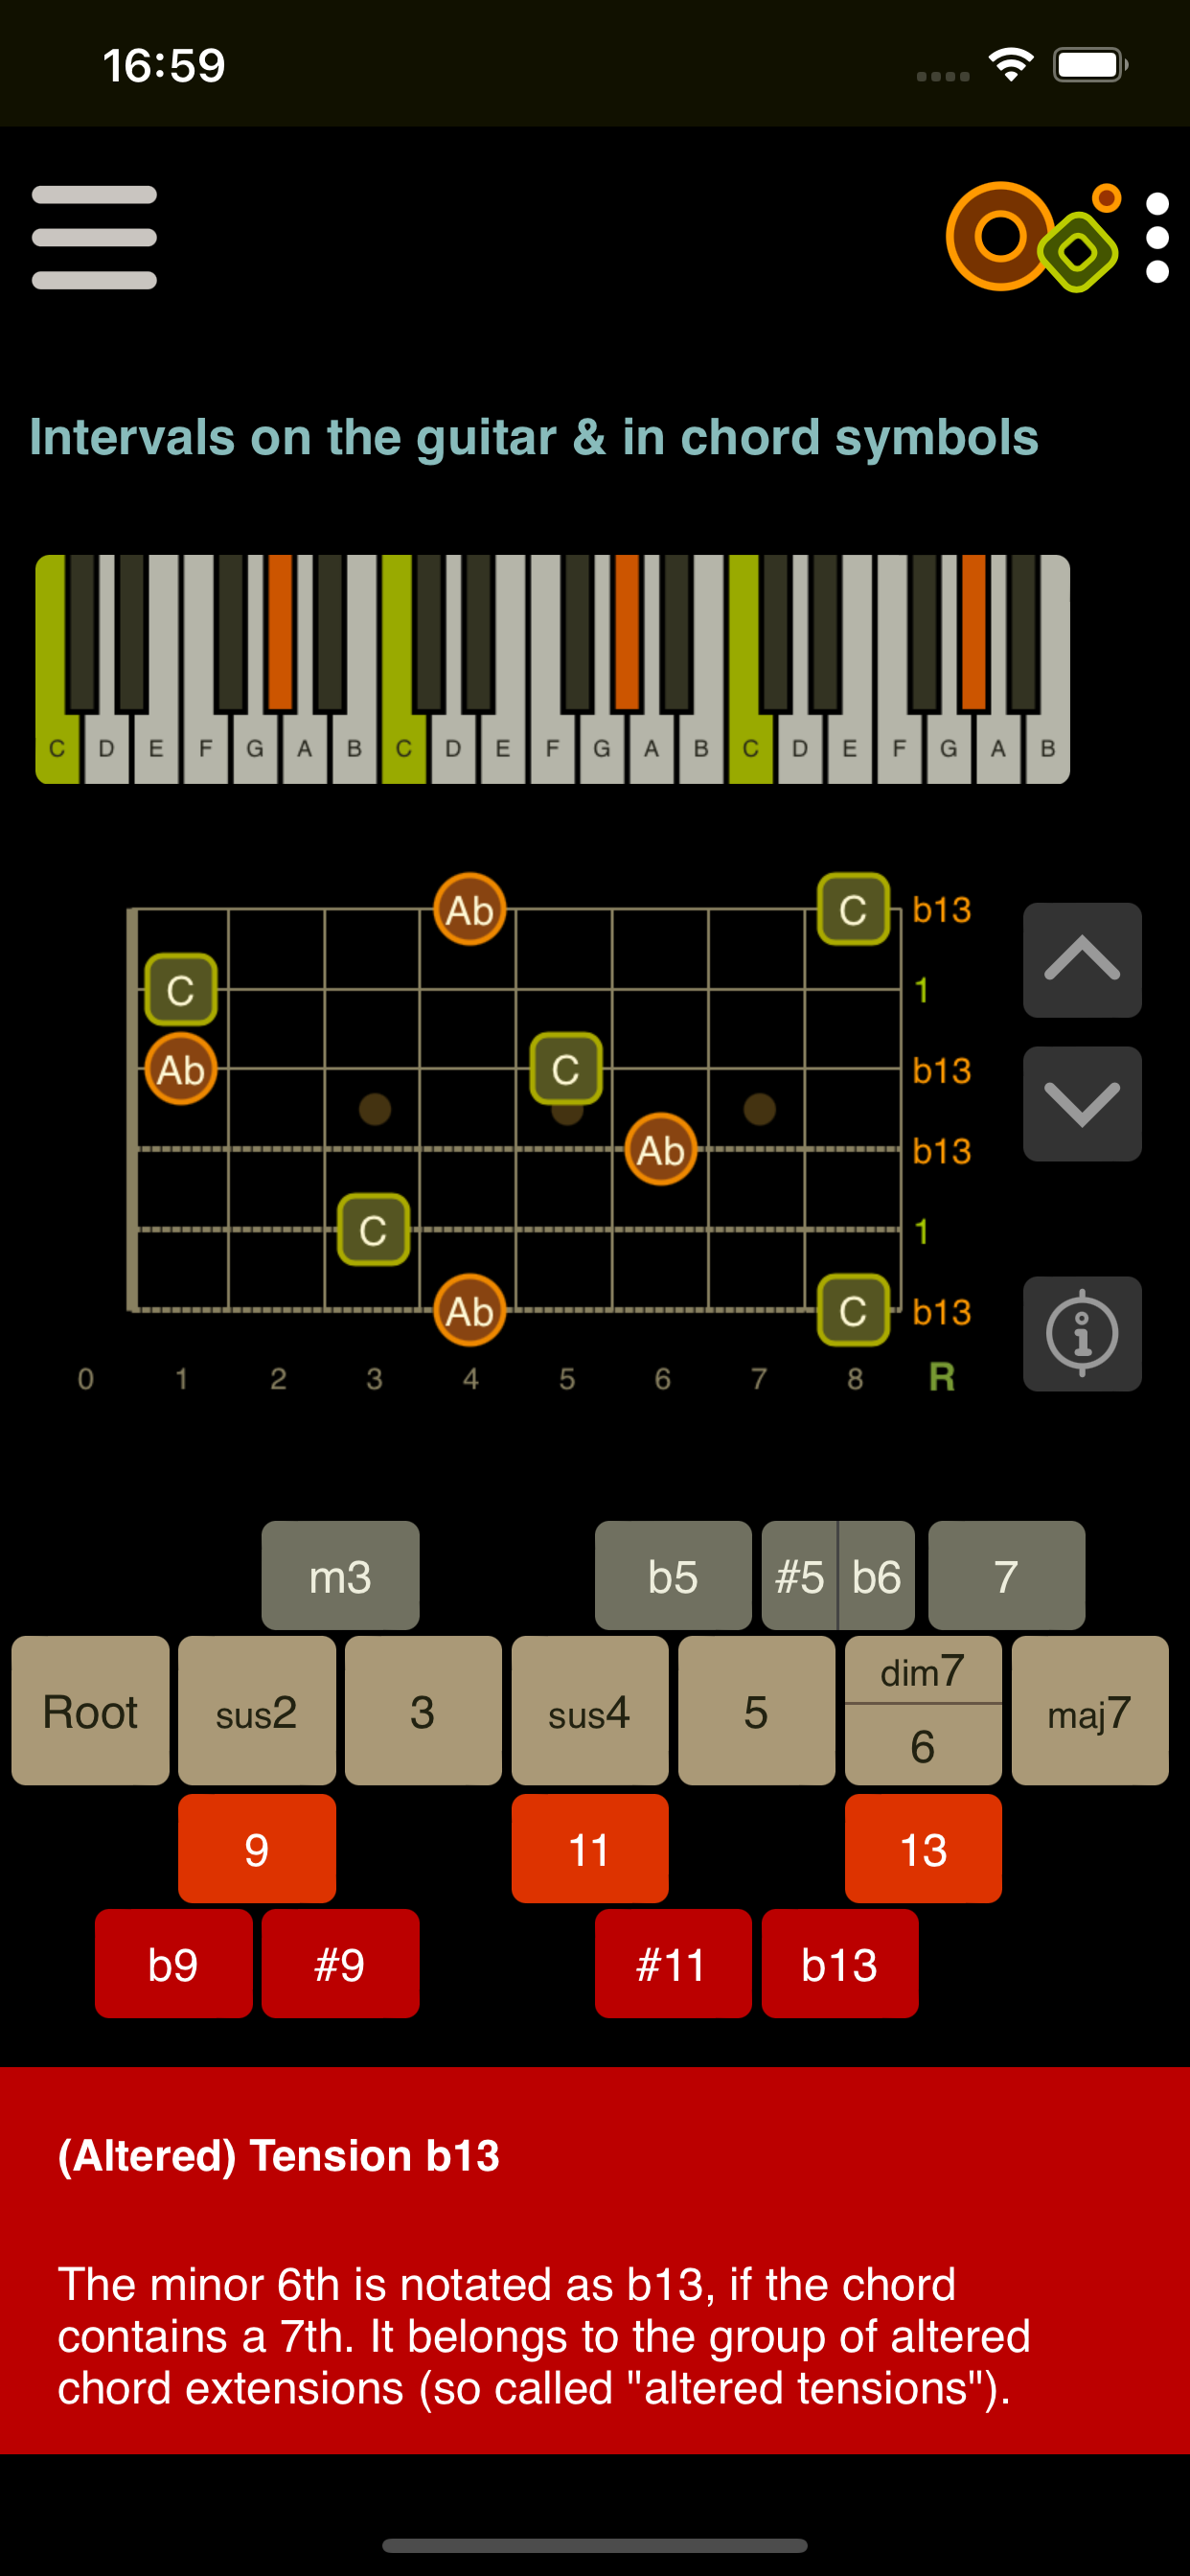 Oolimo app chord intervals